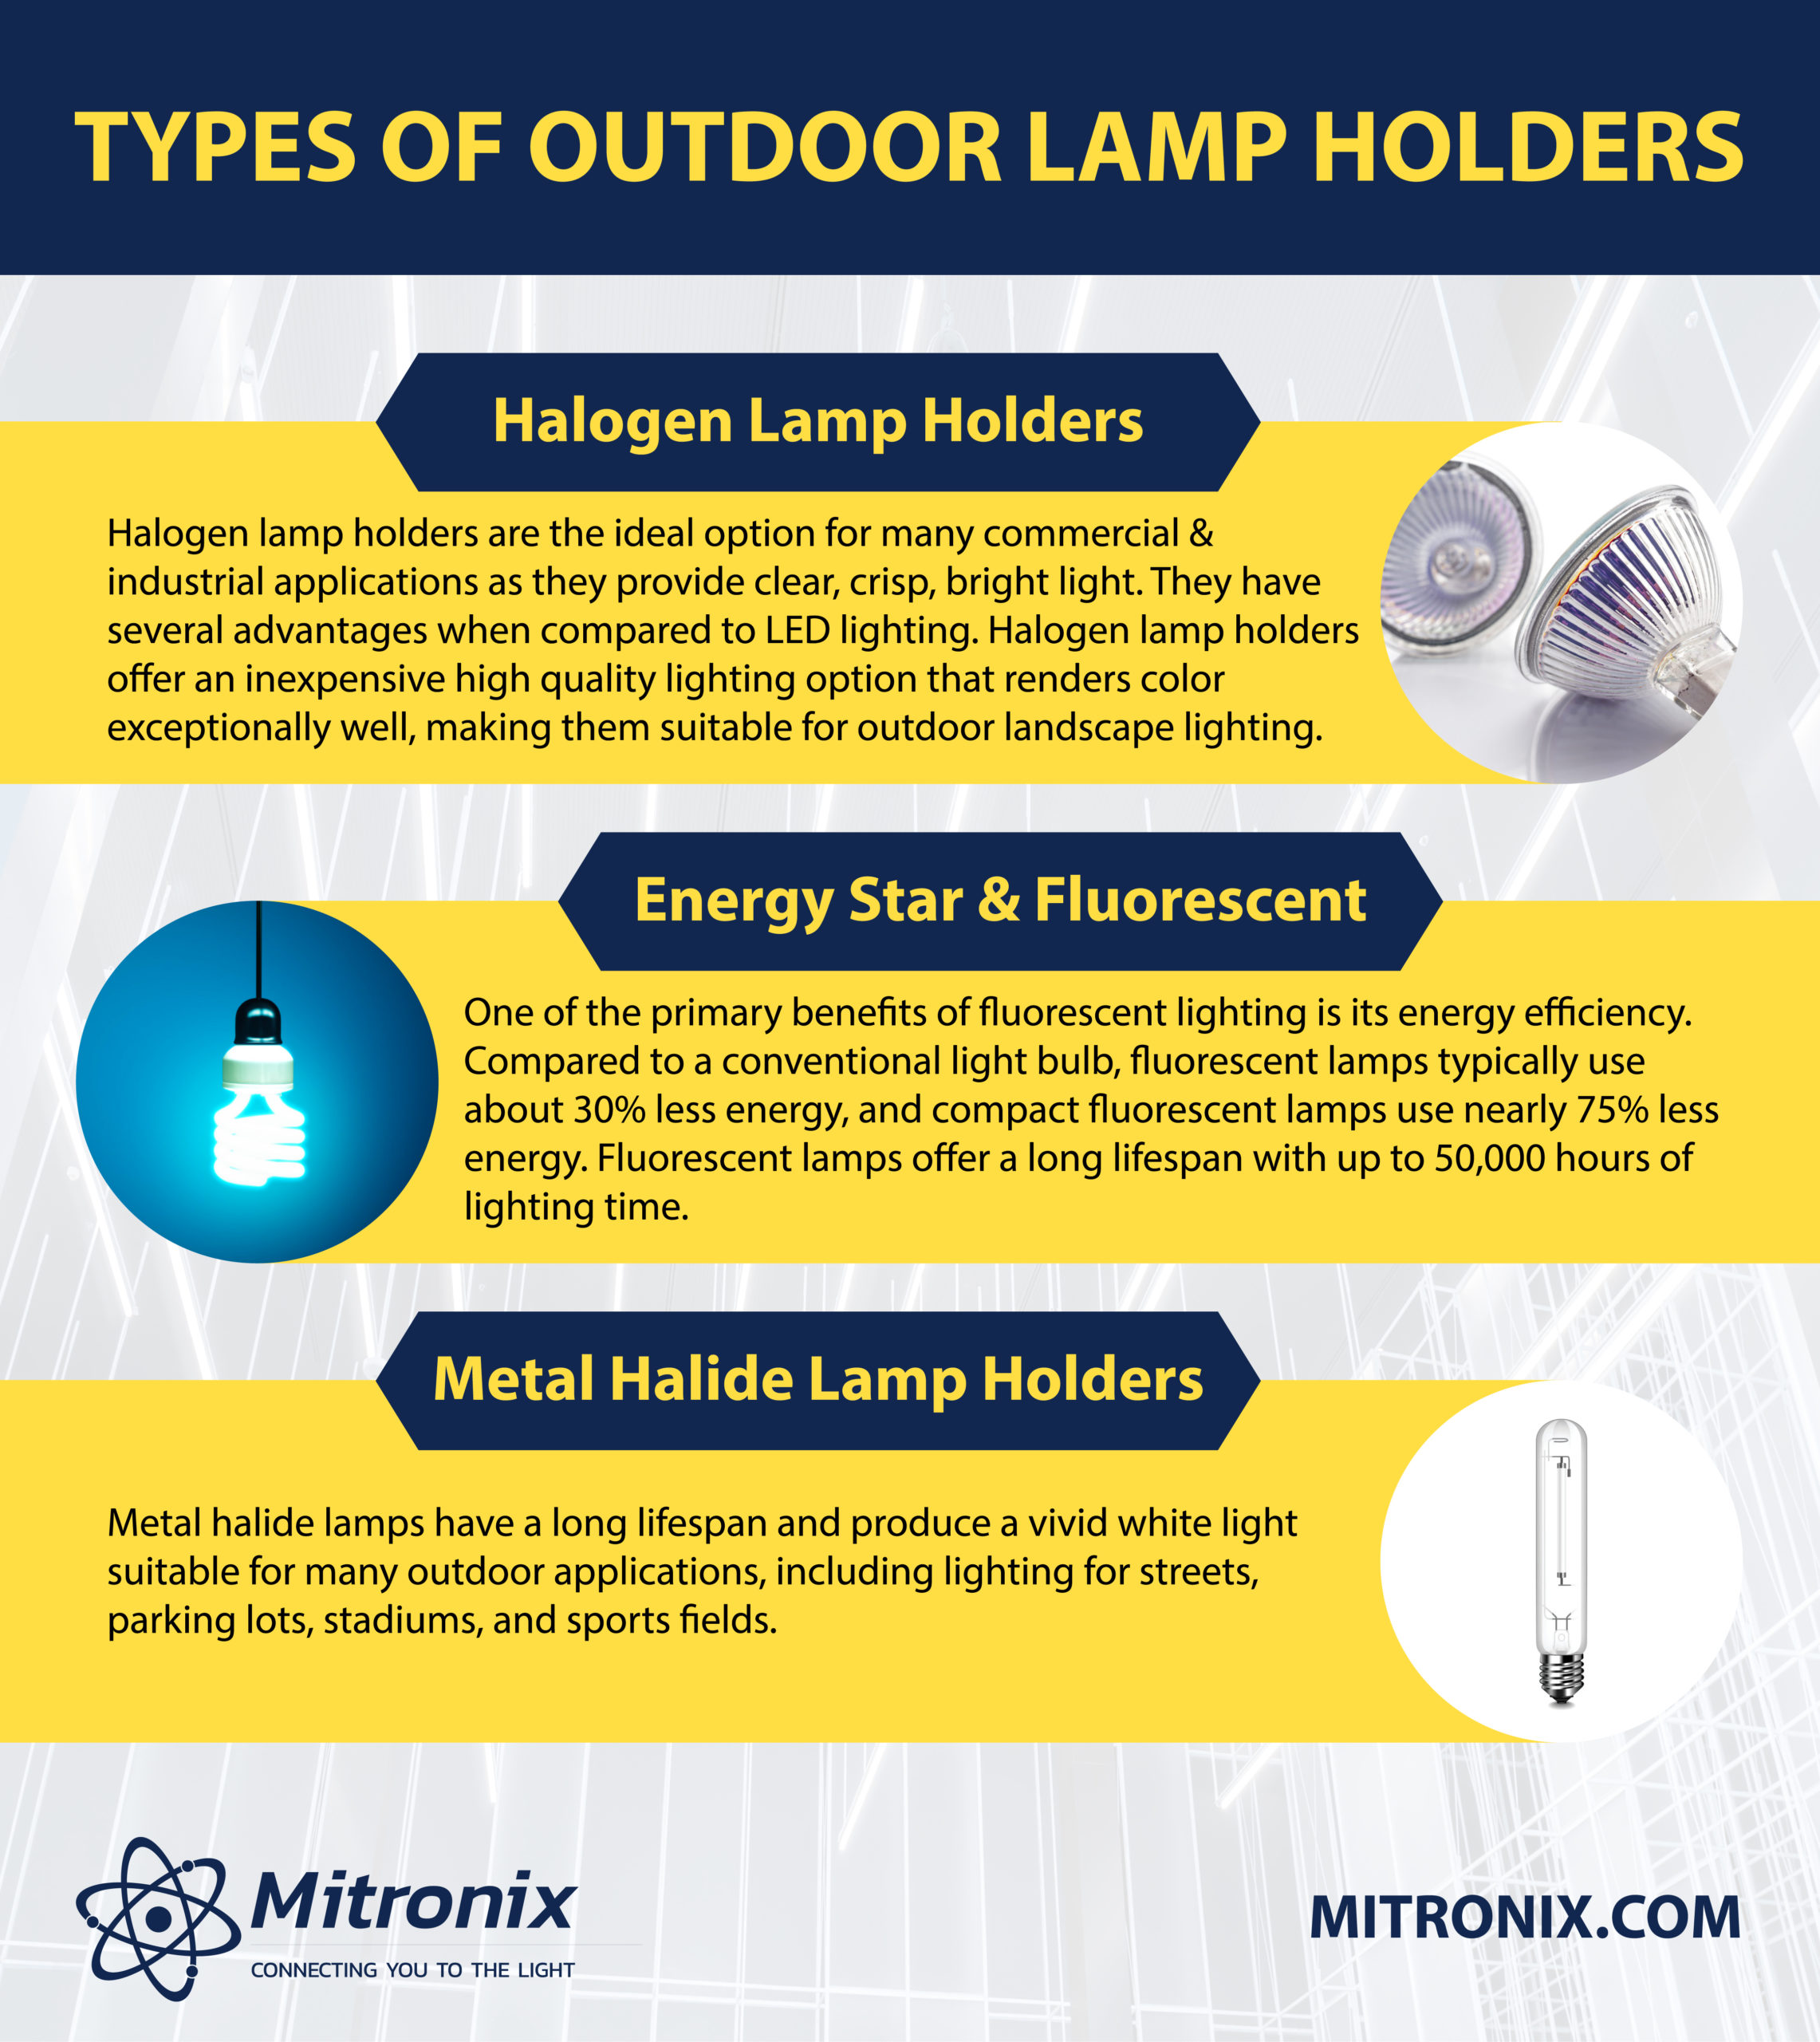 Types of Outdoor Lamp Holders